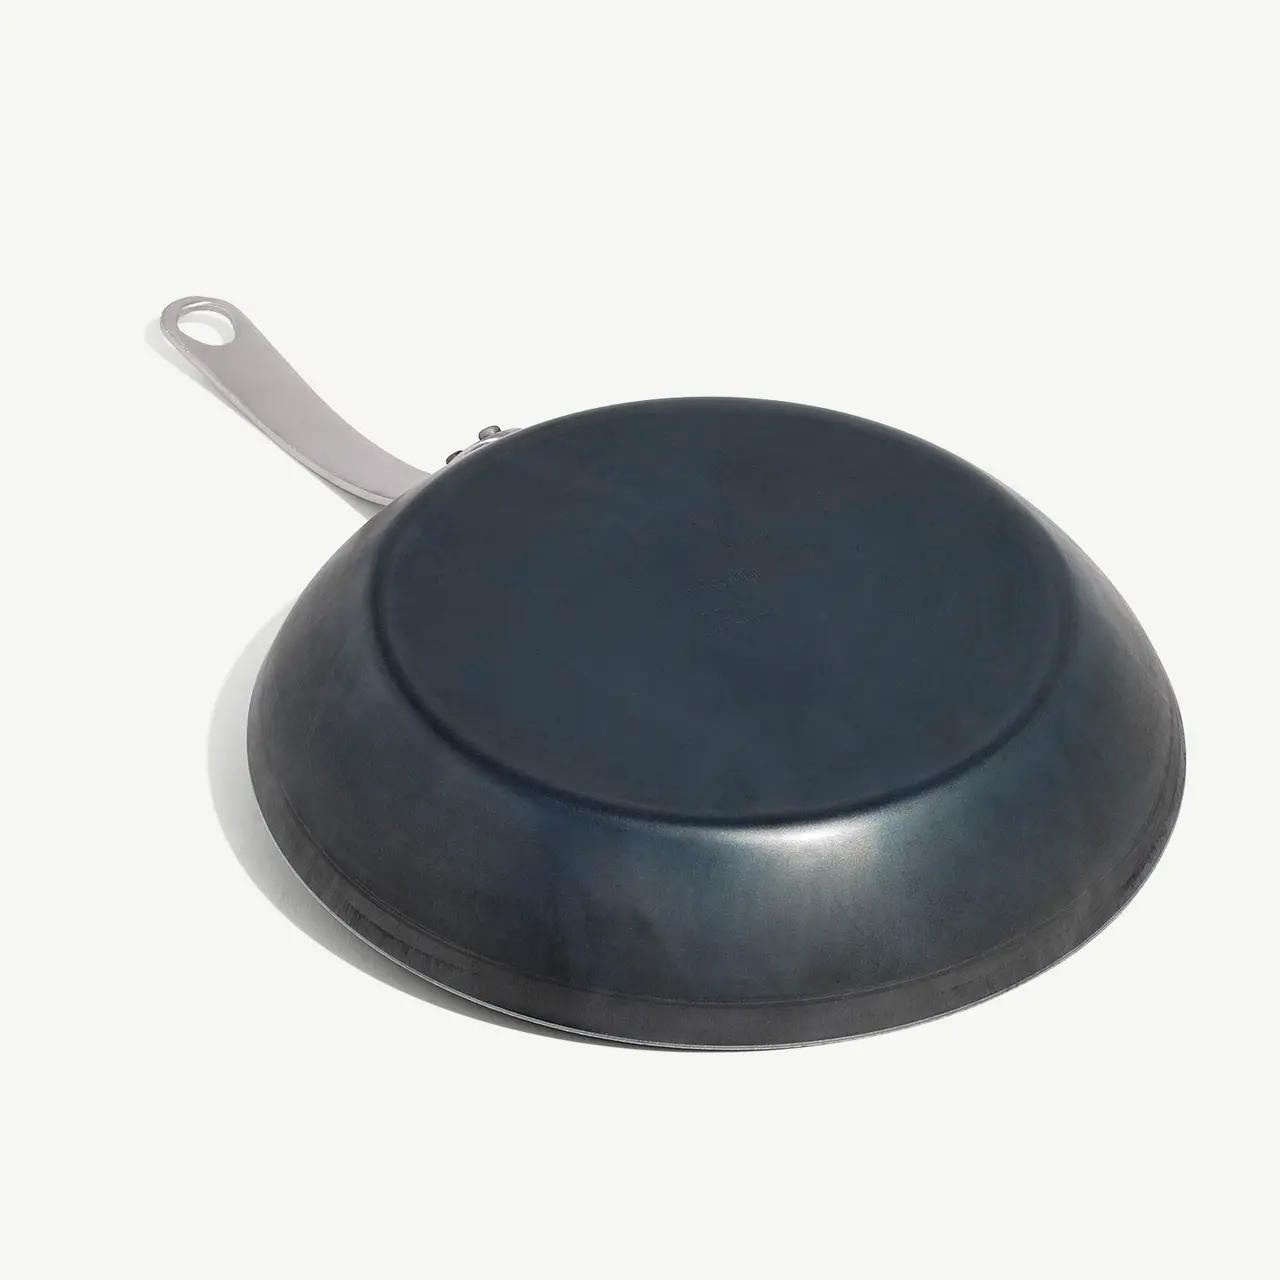 An upside-down frying pan with a silver handle on a white background.